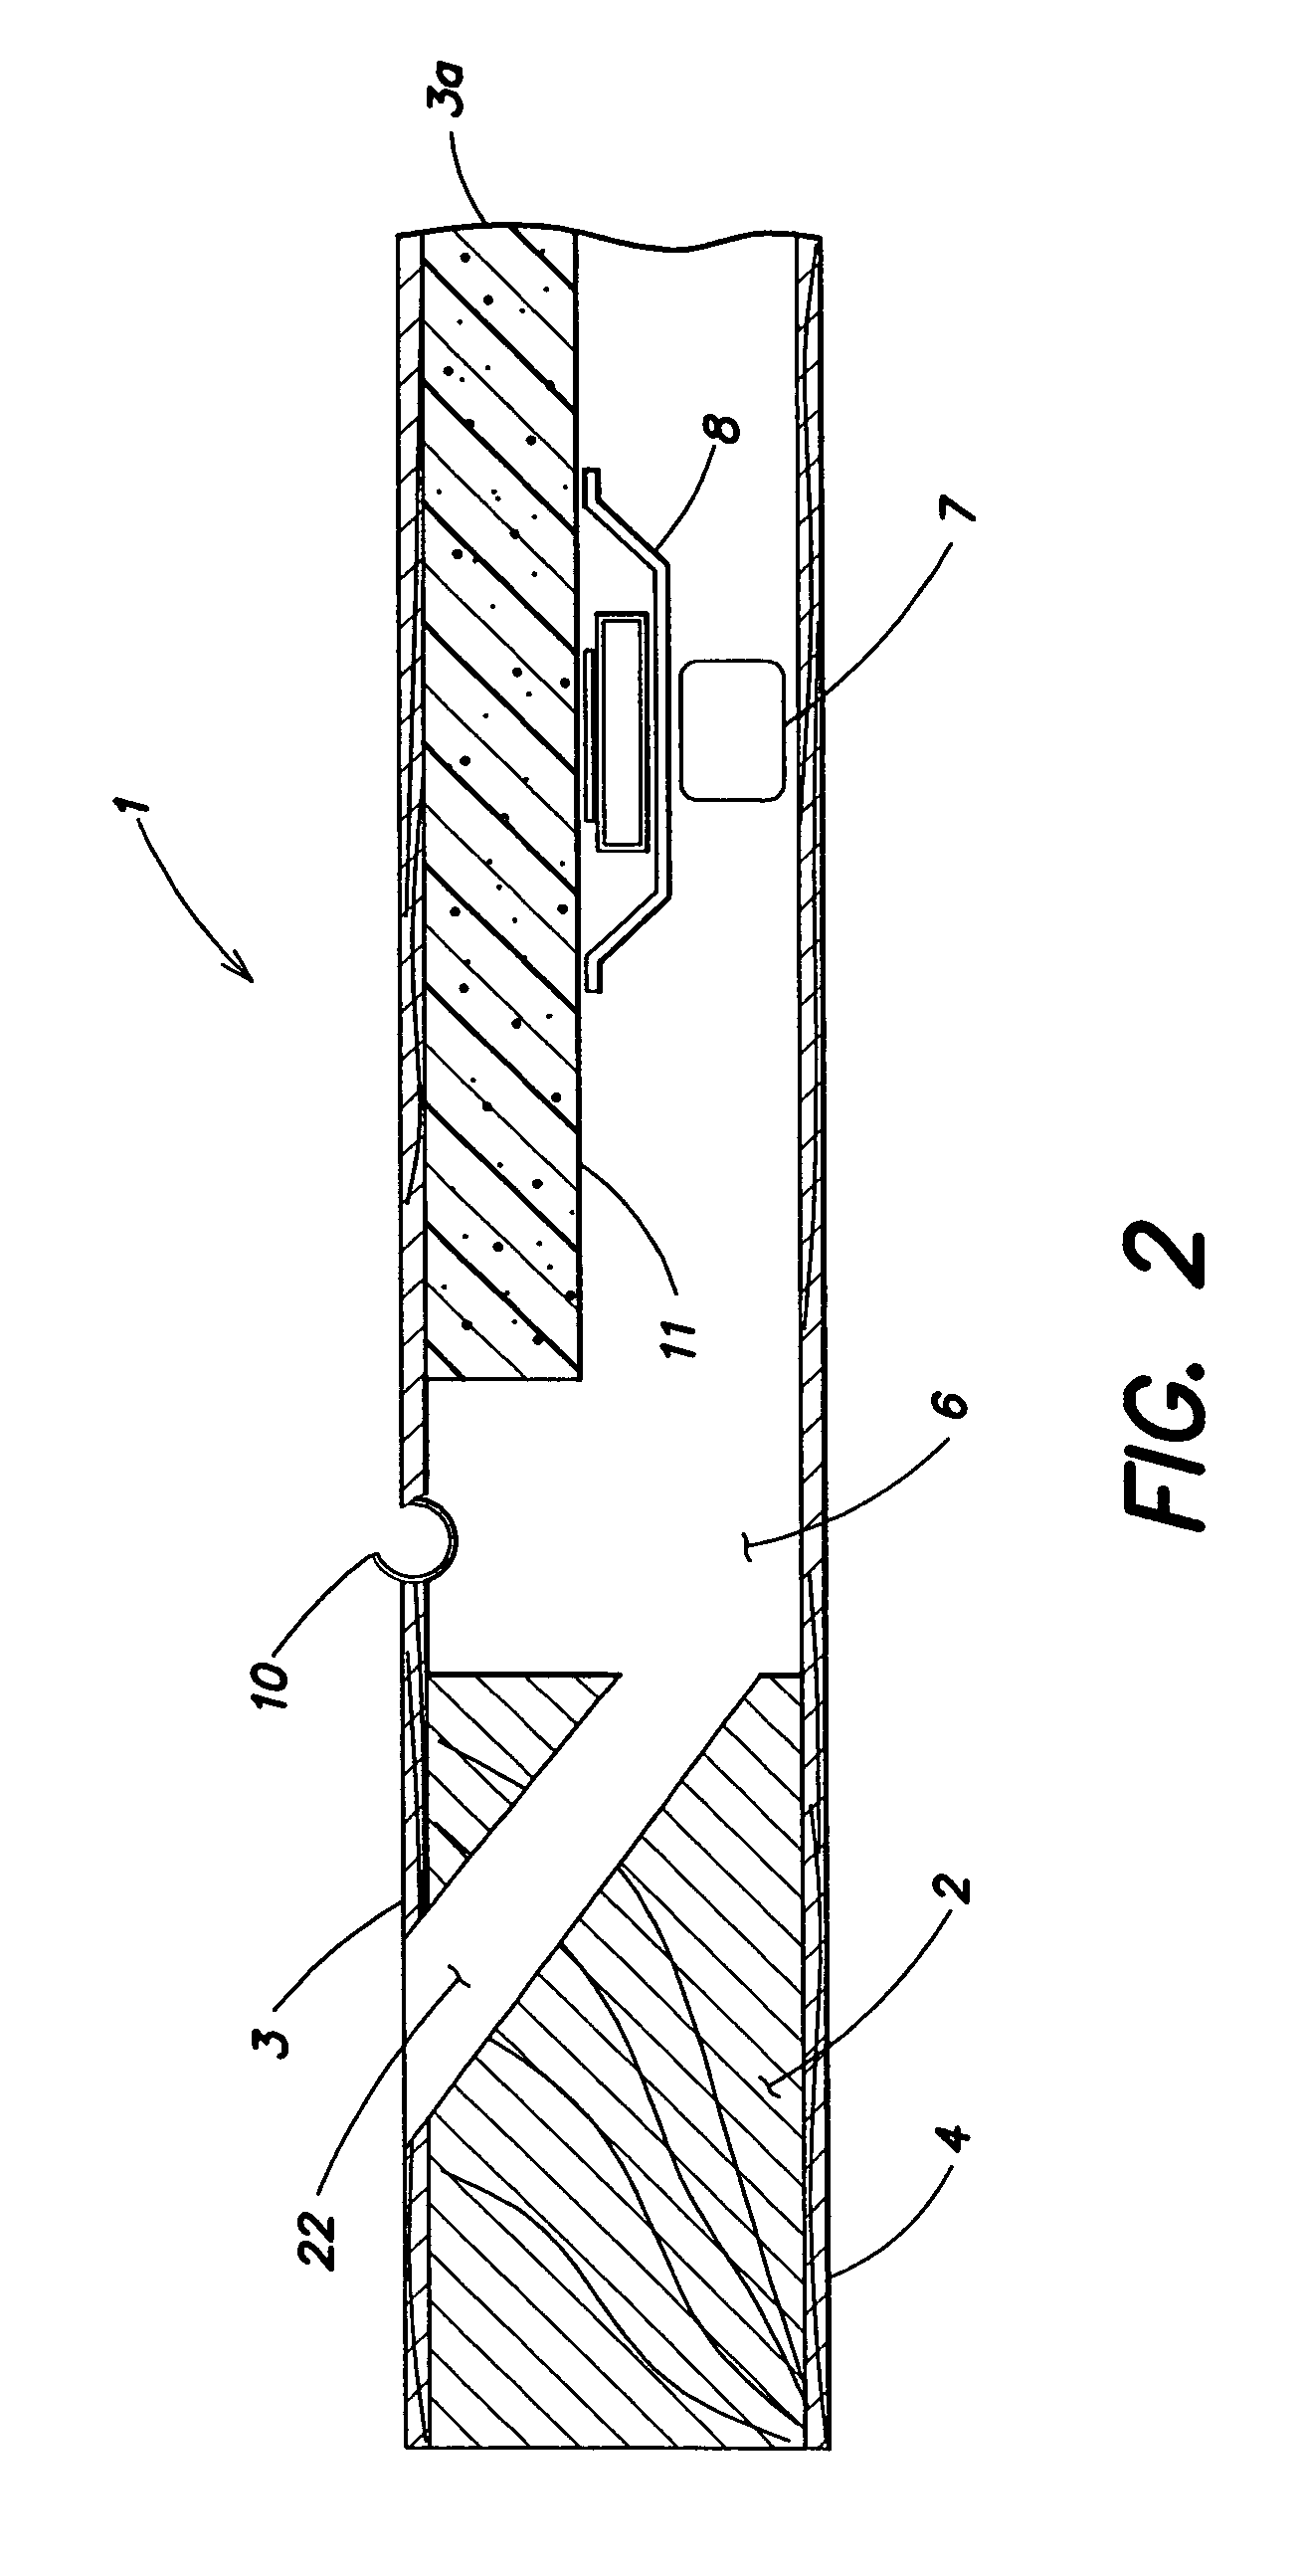 Door with structural components configured to radiate acoustic energy